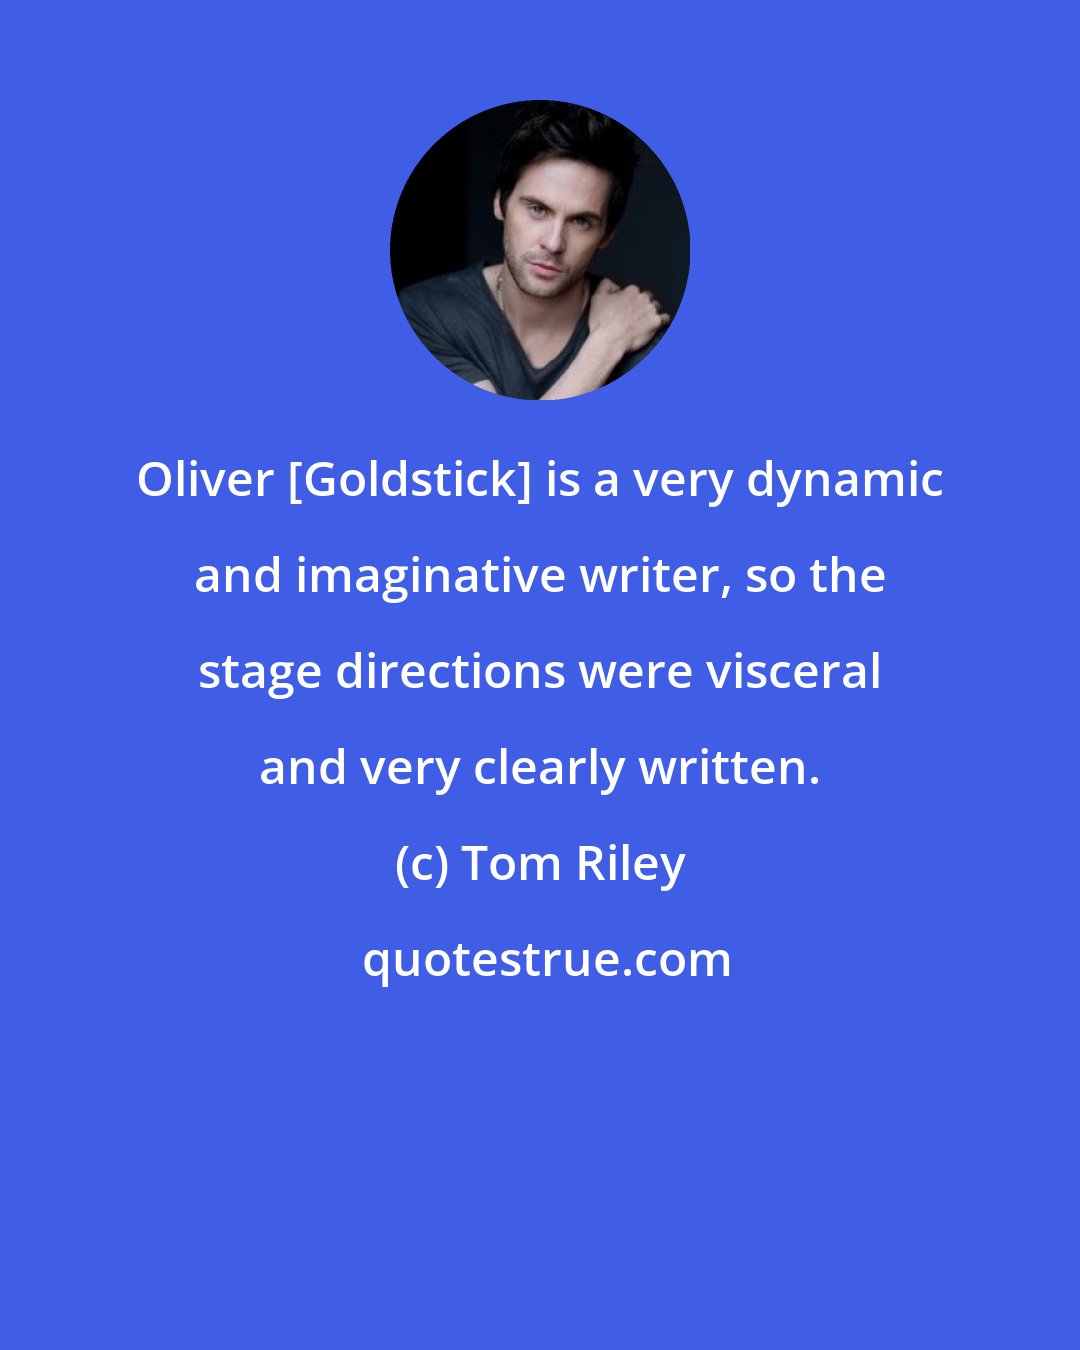 Tom Riley: Oliver [Goldstick] is a very dynamic and imaginative writer, so the stage directions were visceral and very clearly written.